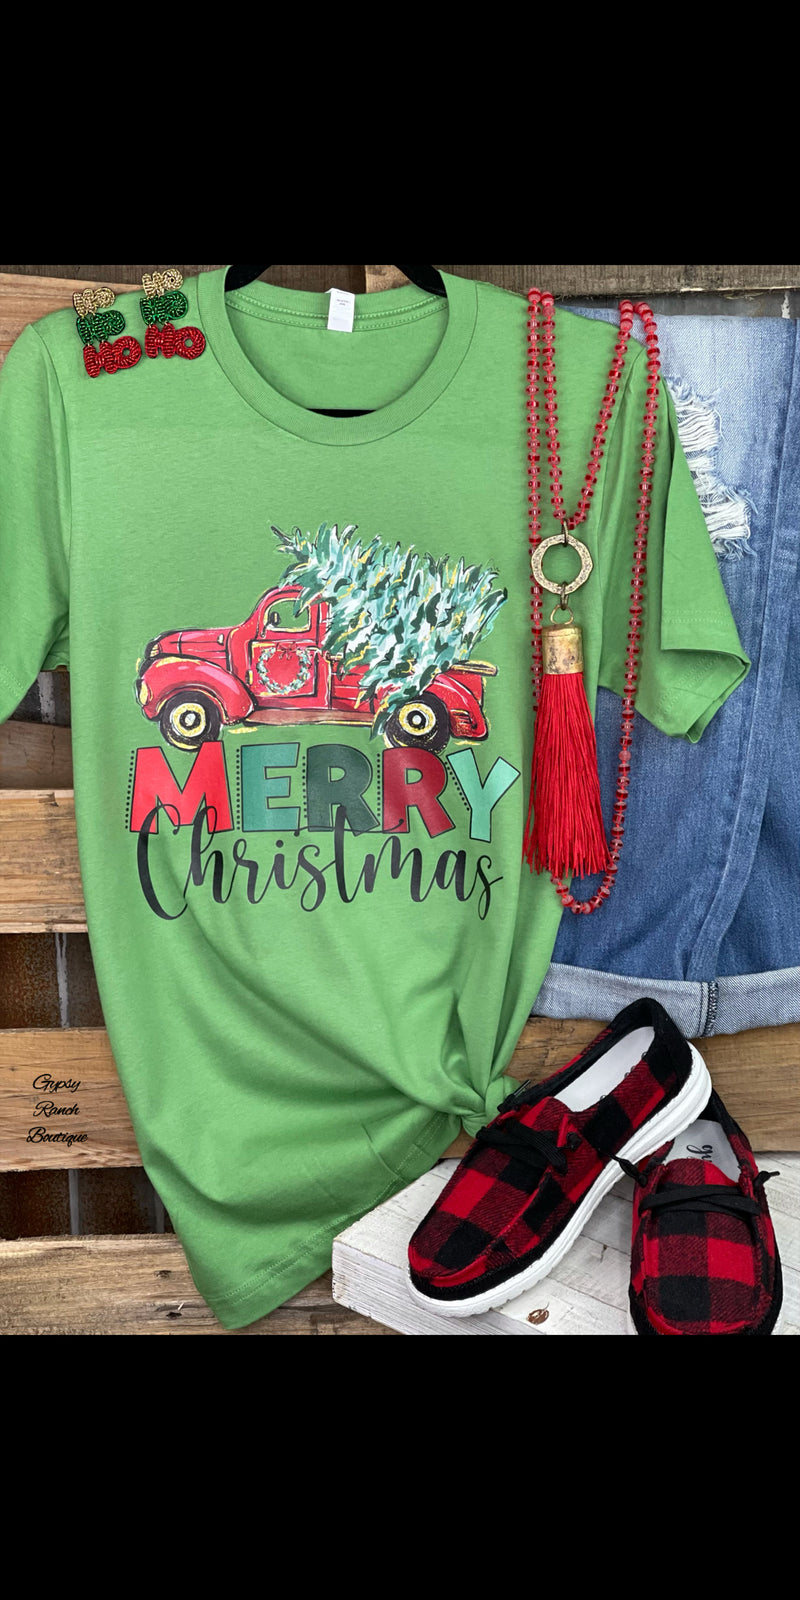 Merry Christmas Truck on Green Top - Also in Plus Size